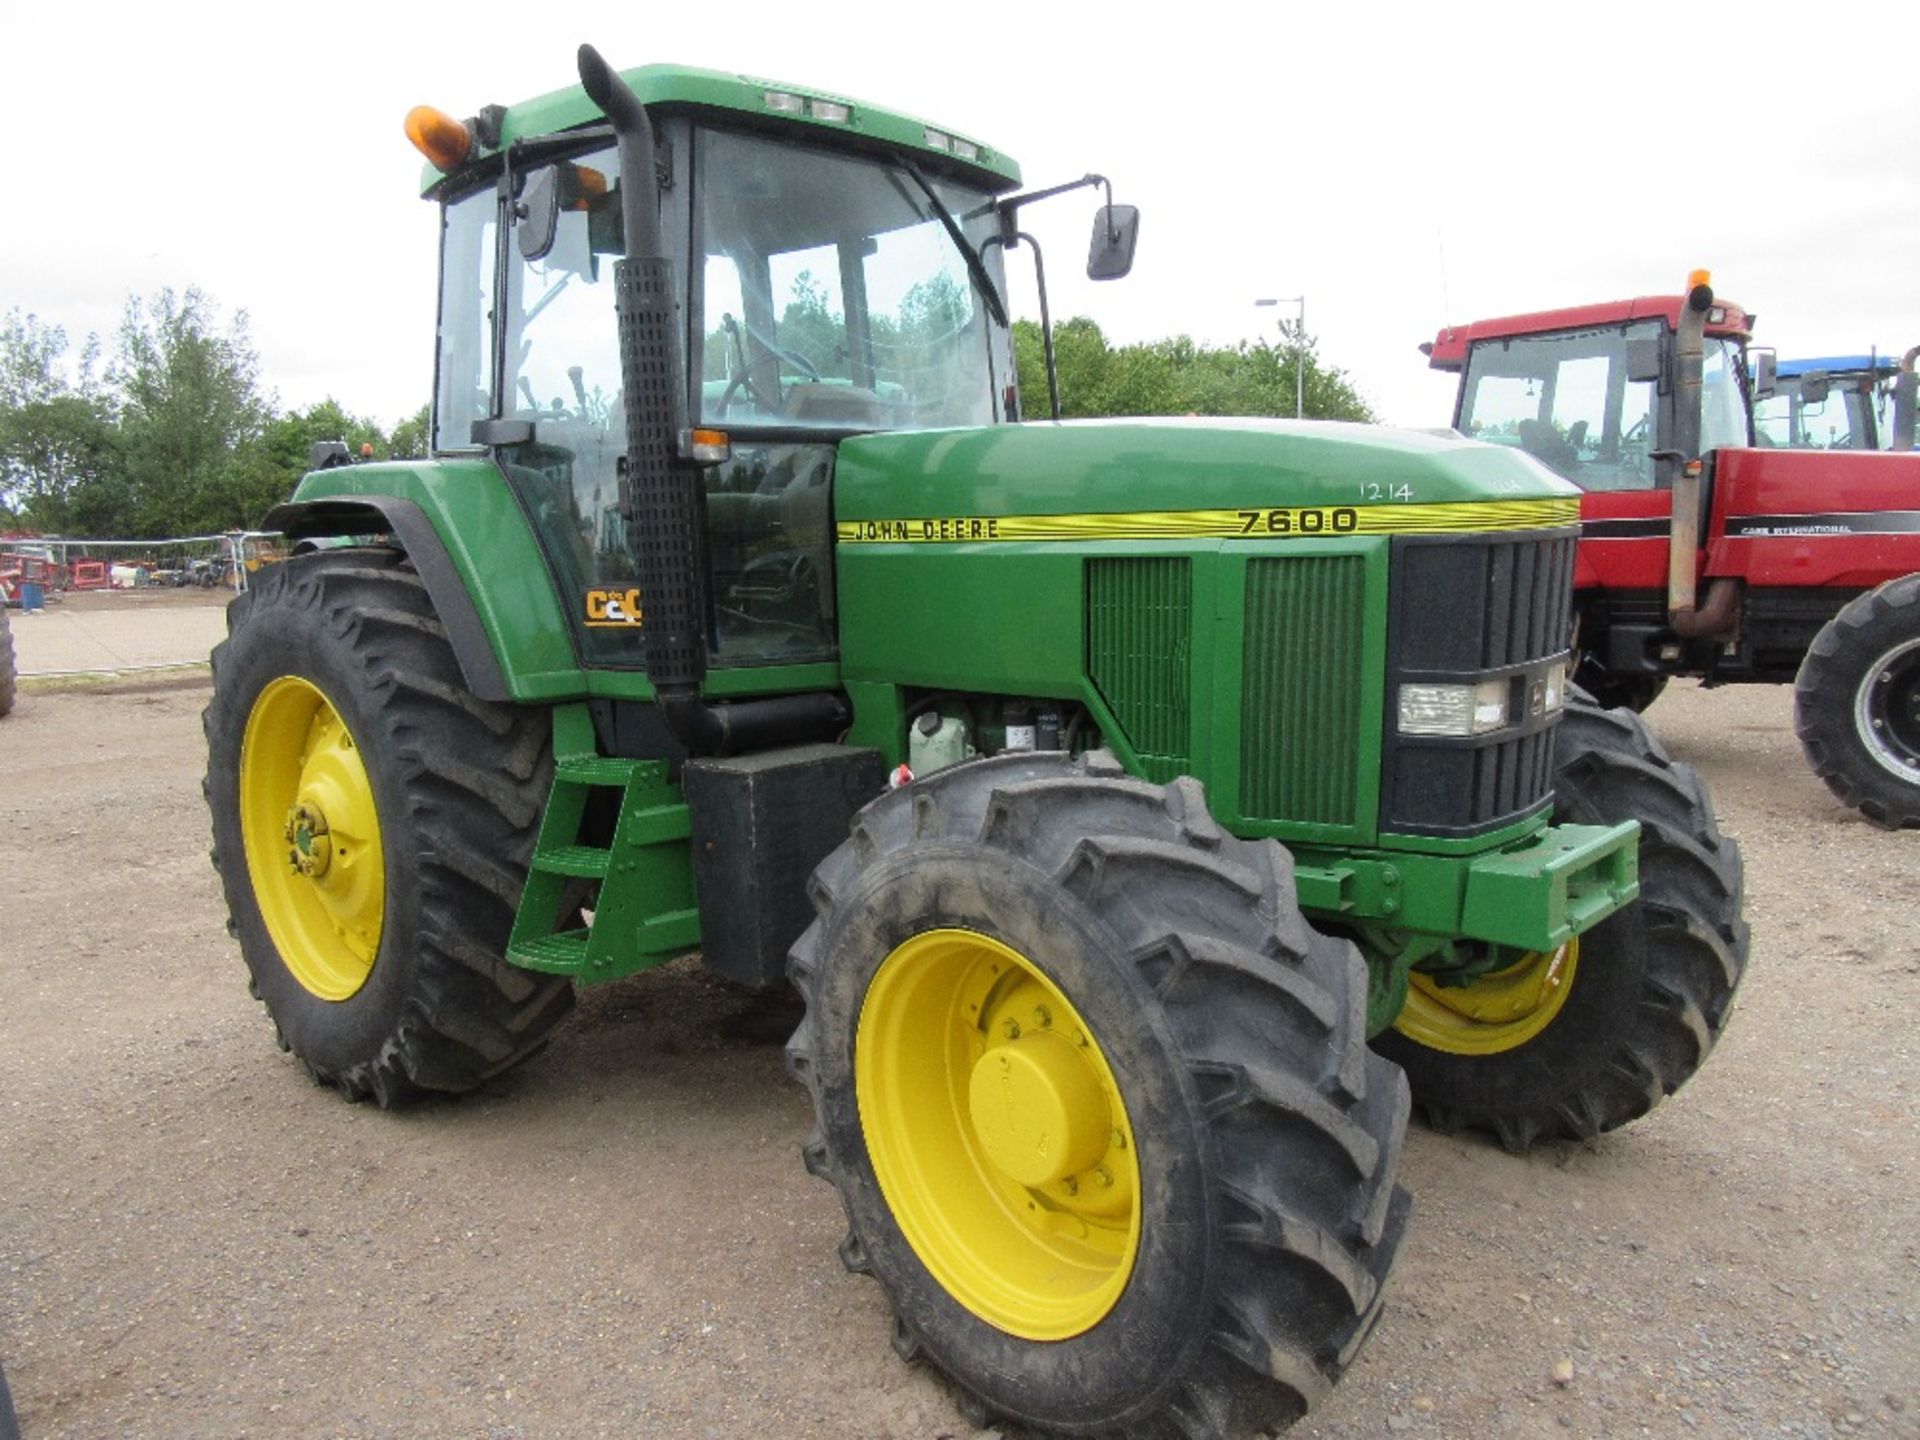 1993 John Deere 7600 140hp Tractor. V5 will be supplied.  Ser.No. H001940 - Image 8 of 9